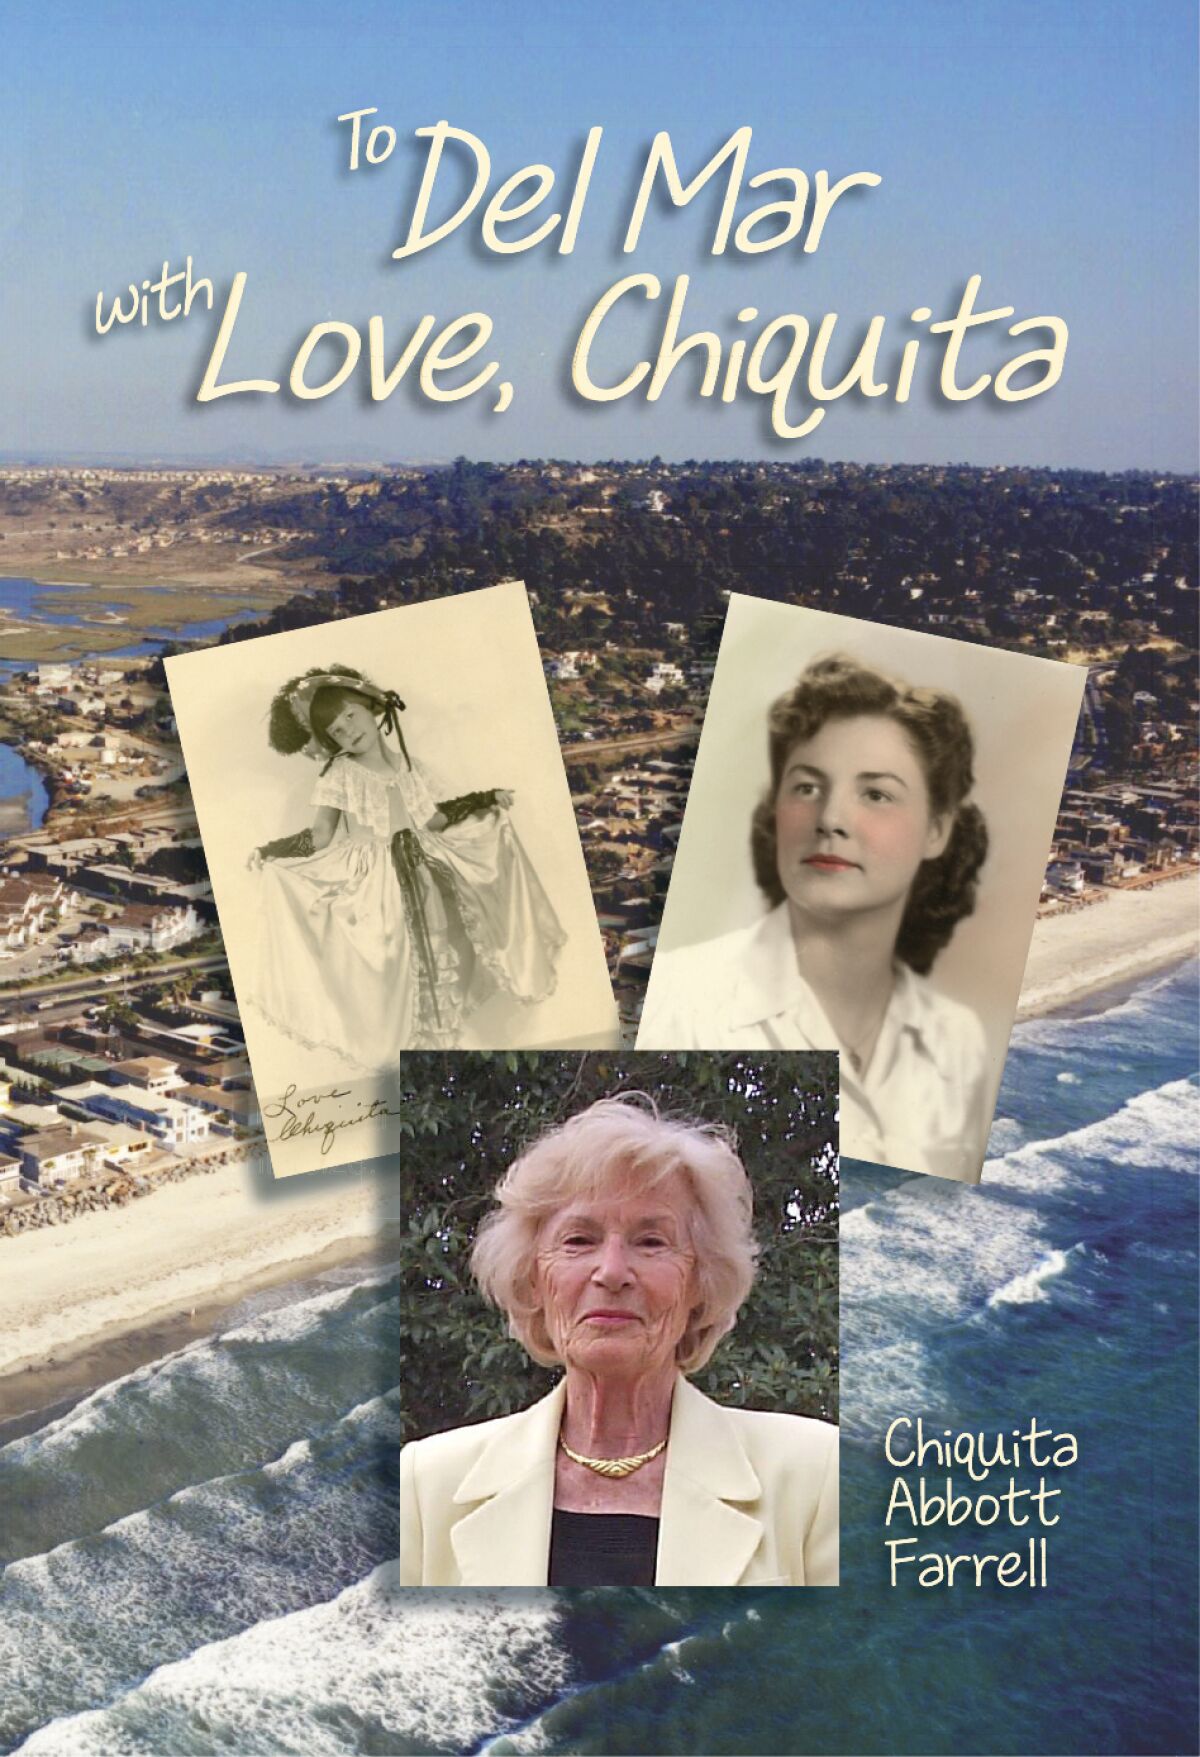 The cover of “To Del Mar with Love, Chiquita”